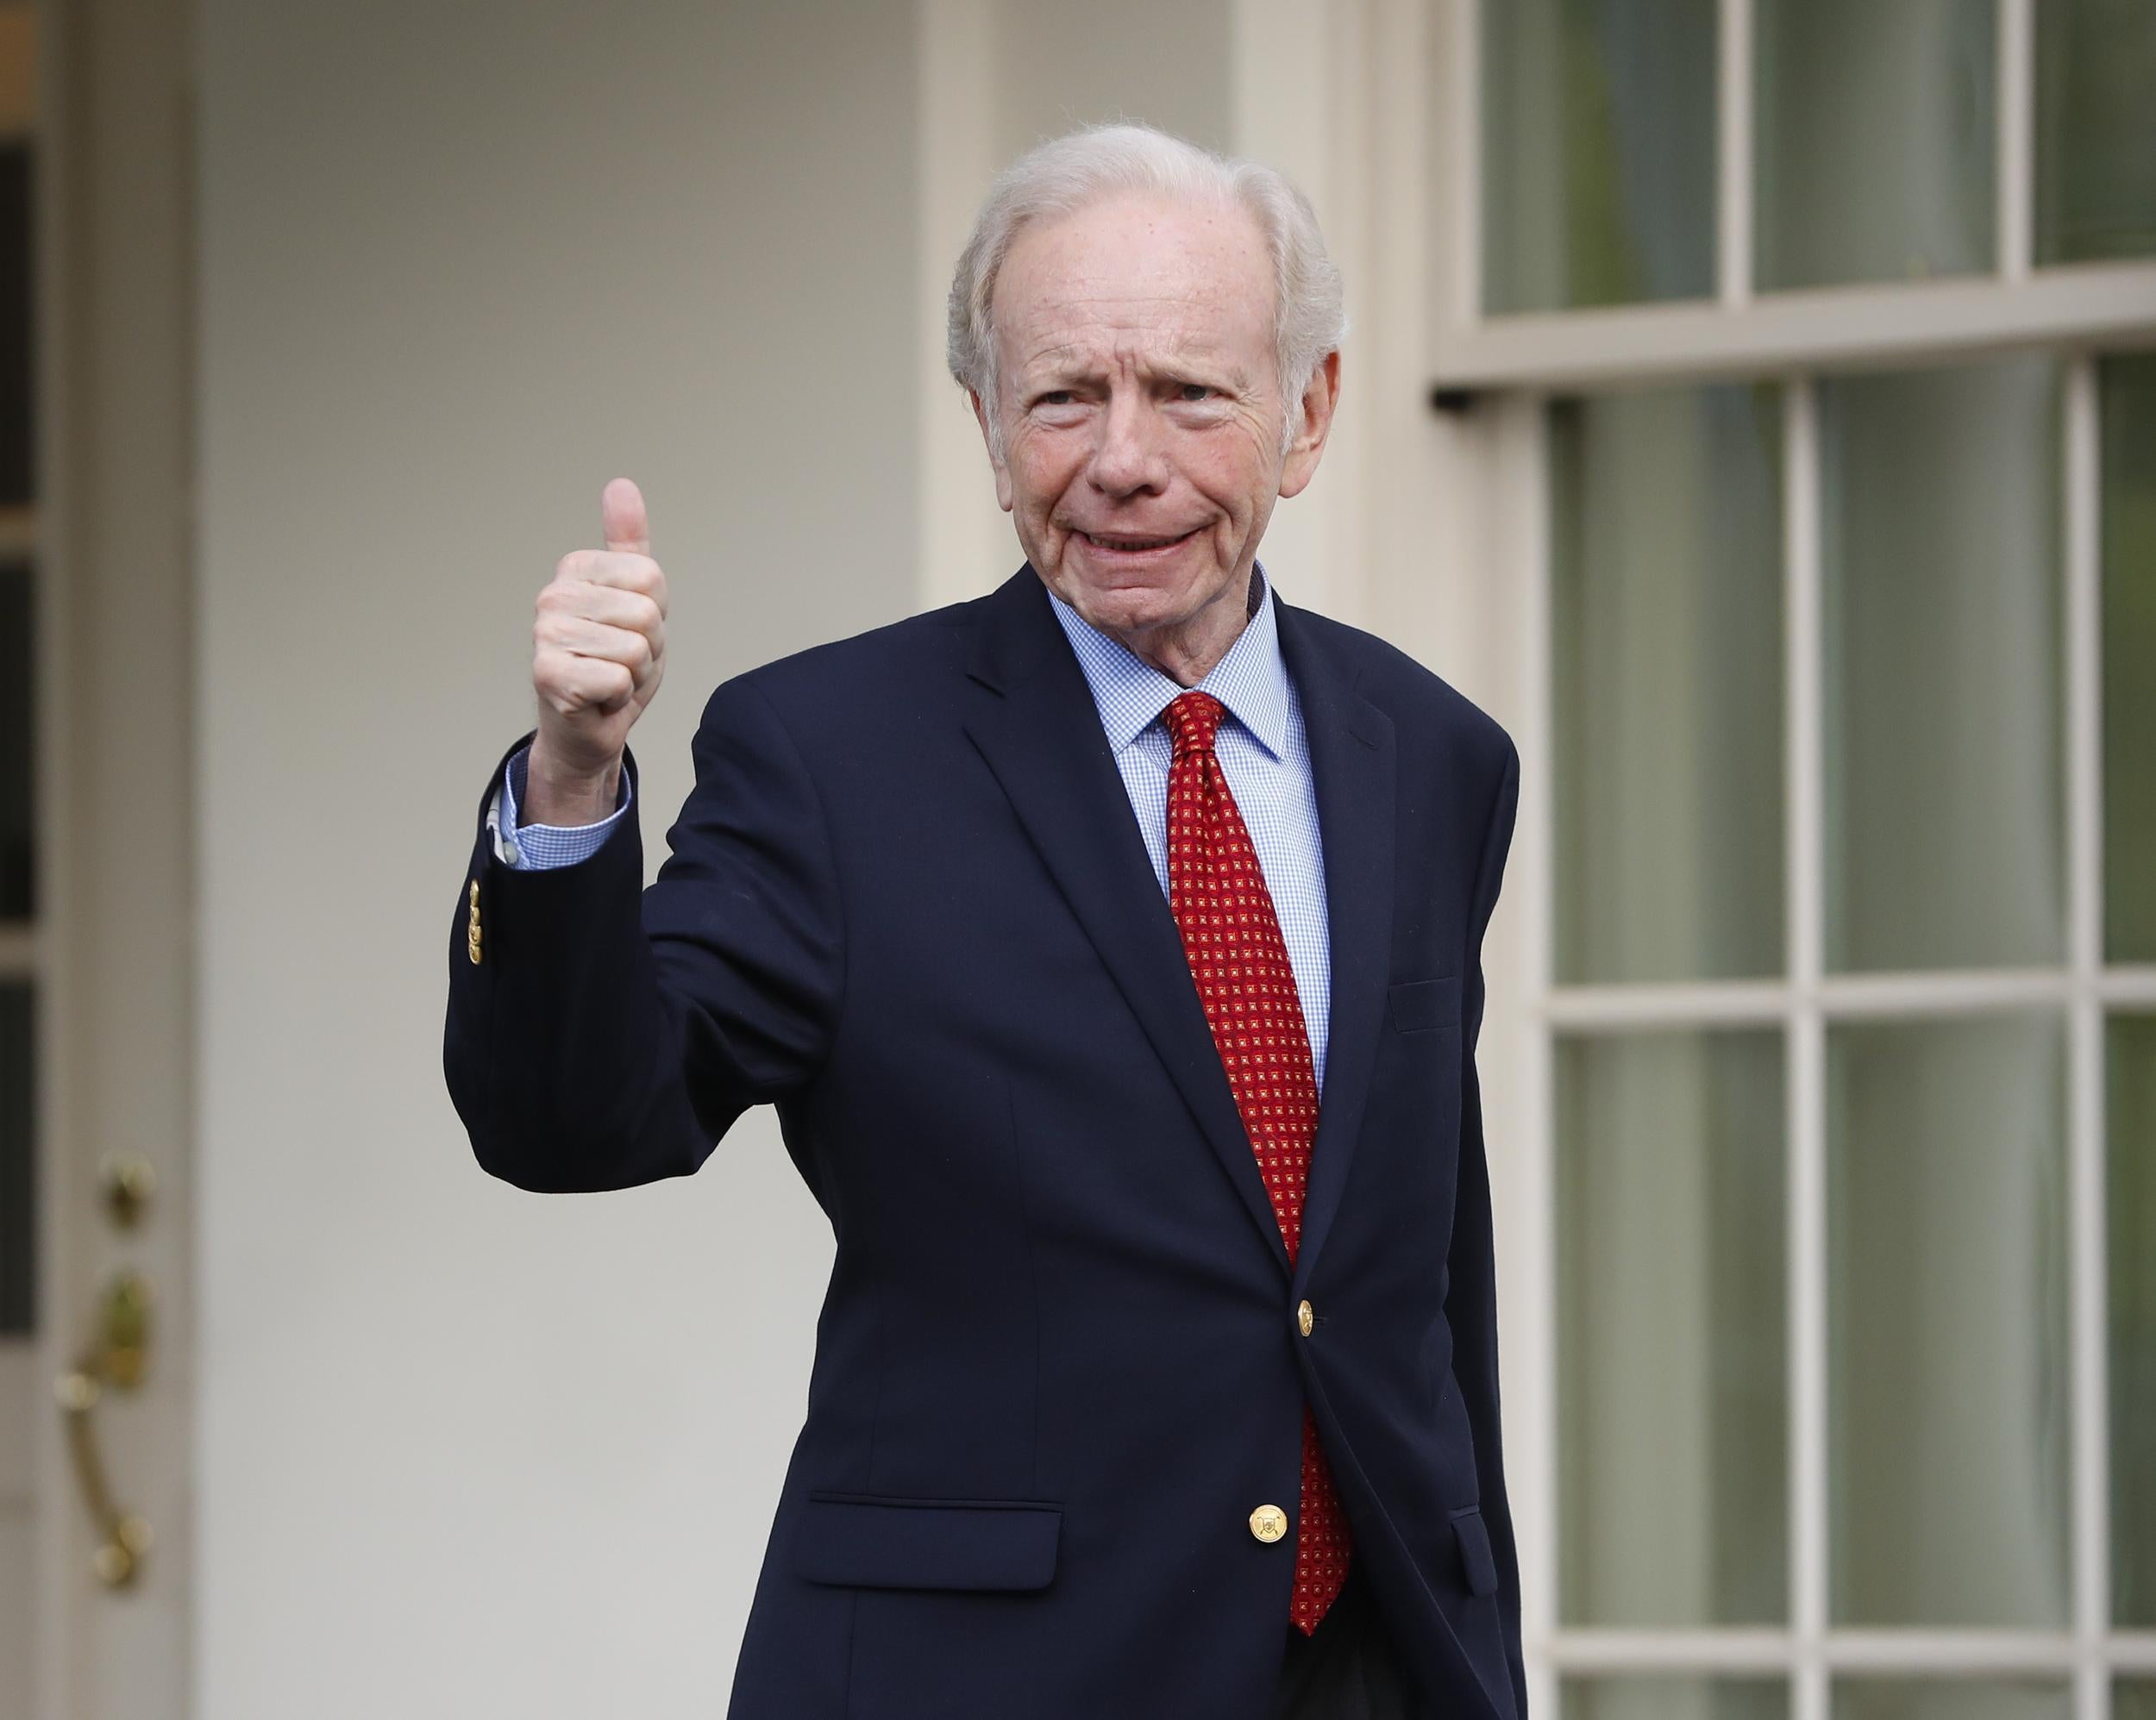 Former Connecticut Sen. Joe Lieberman gives a 'thumbs-up' as he leaves the West Wing of the White House